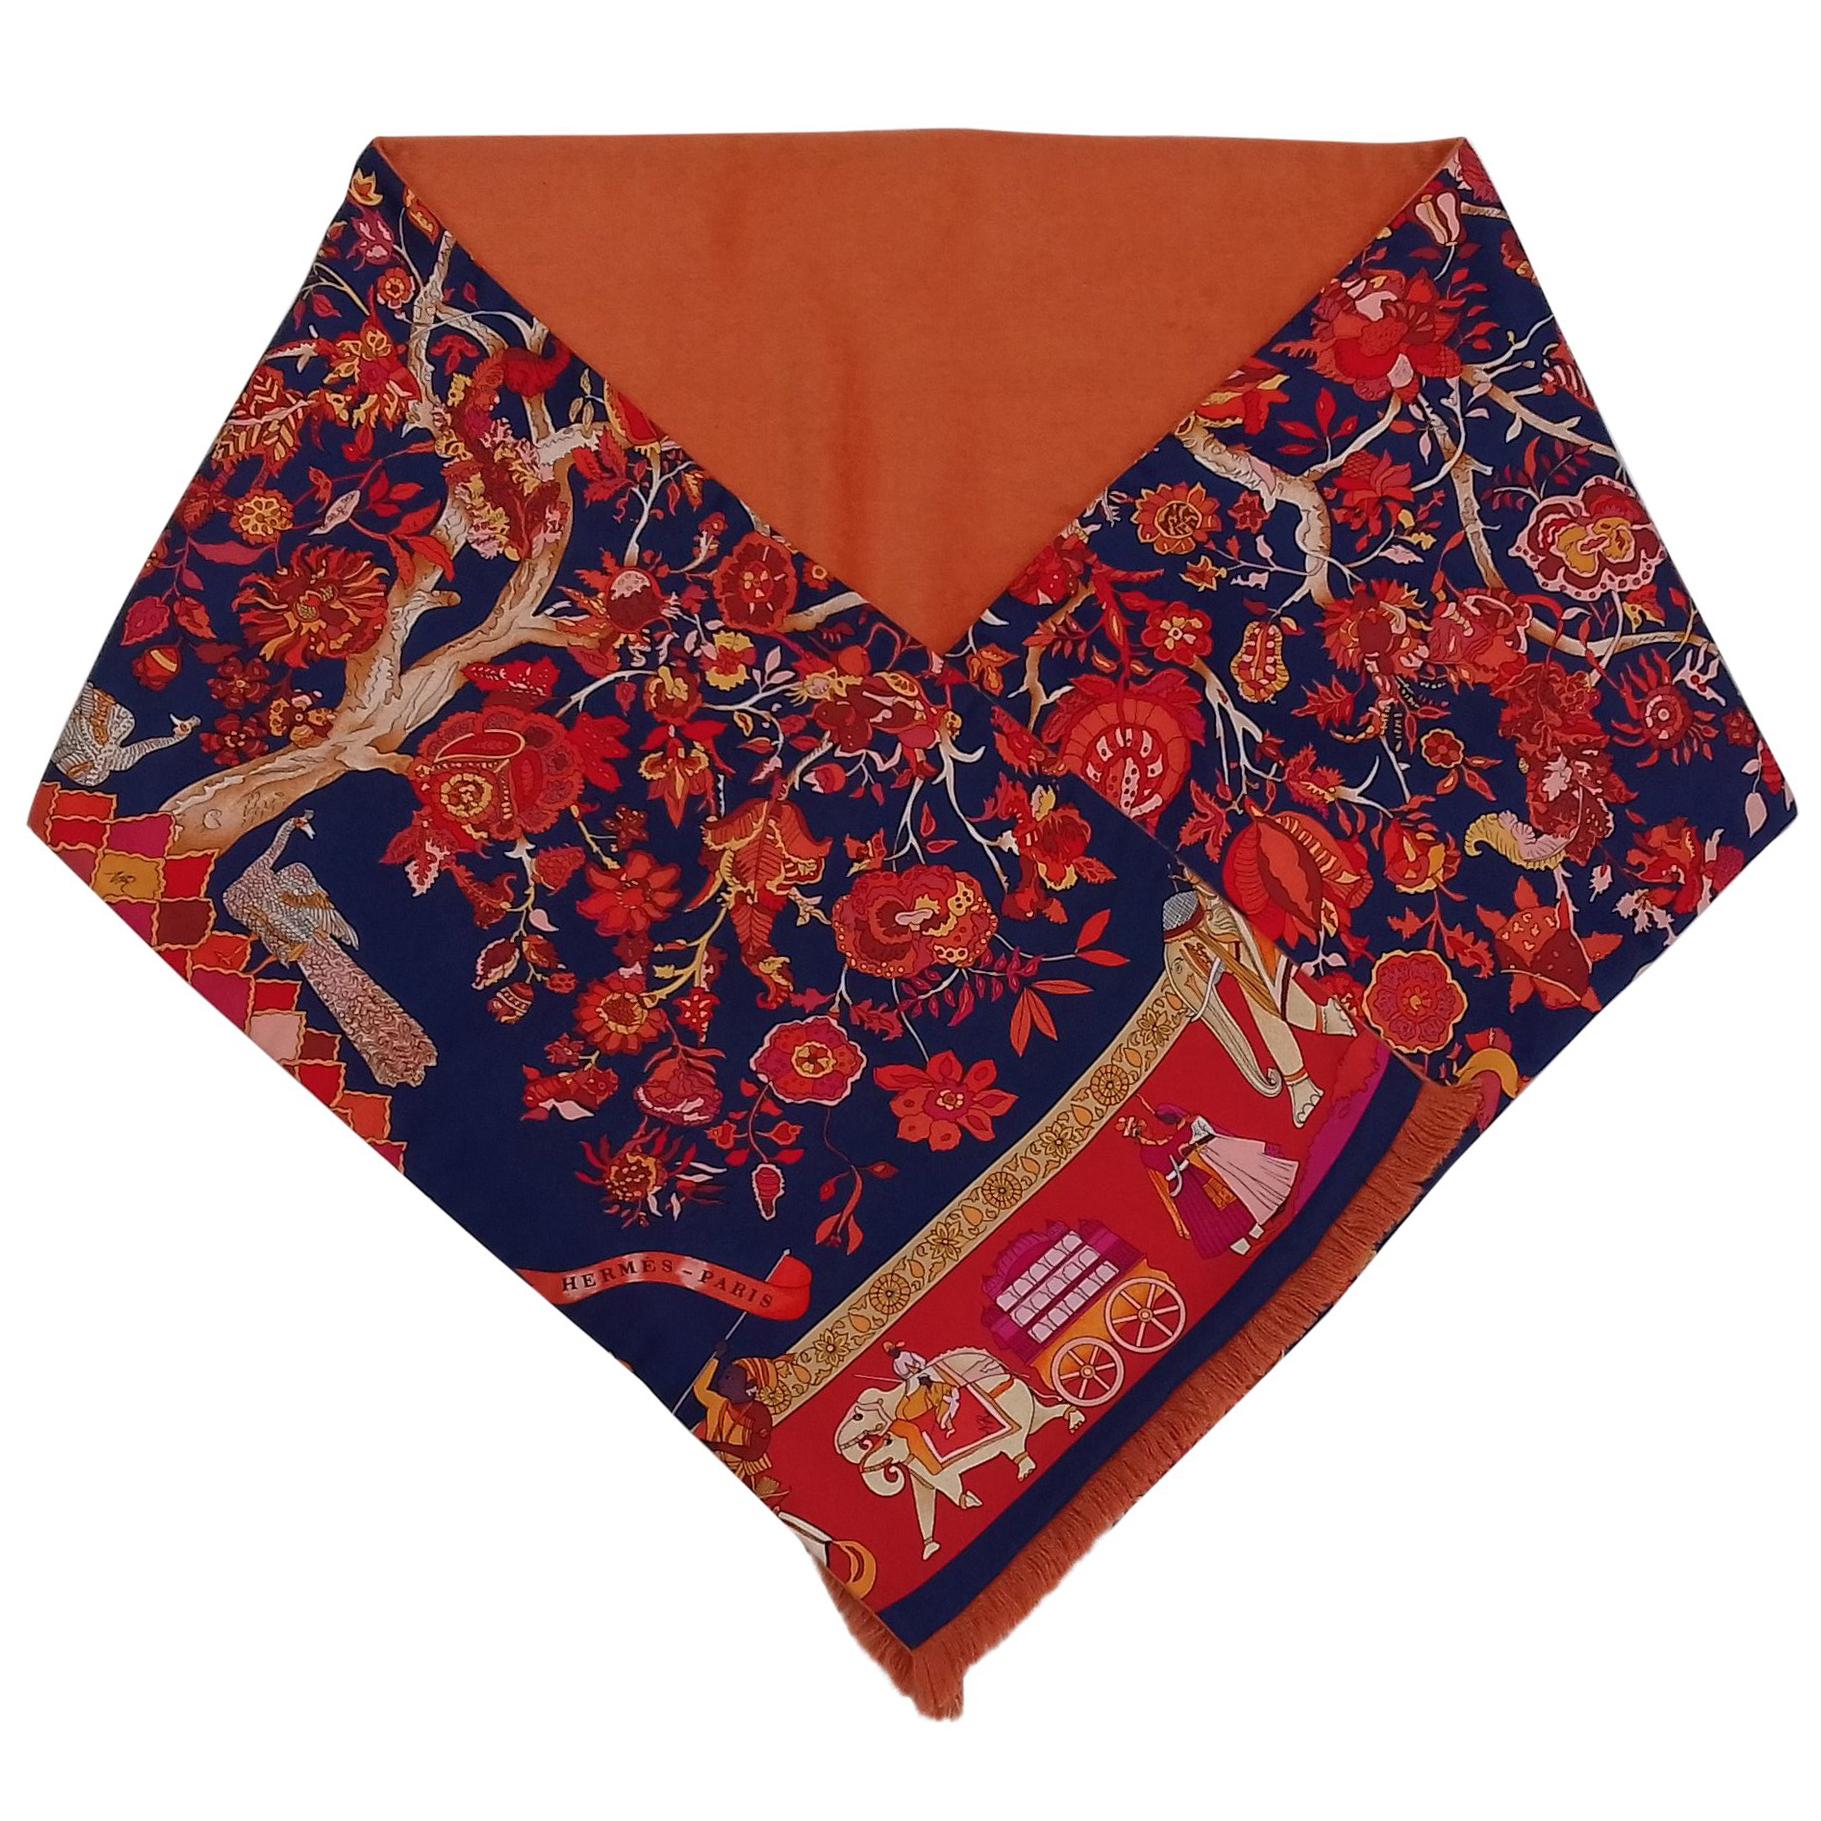 Hermès Long Scarf Stole Pashmina Cashmere and Silk Fantaisies Indiennes Dubigeon